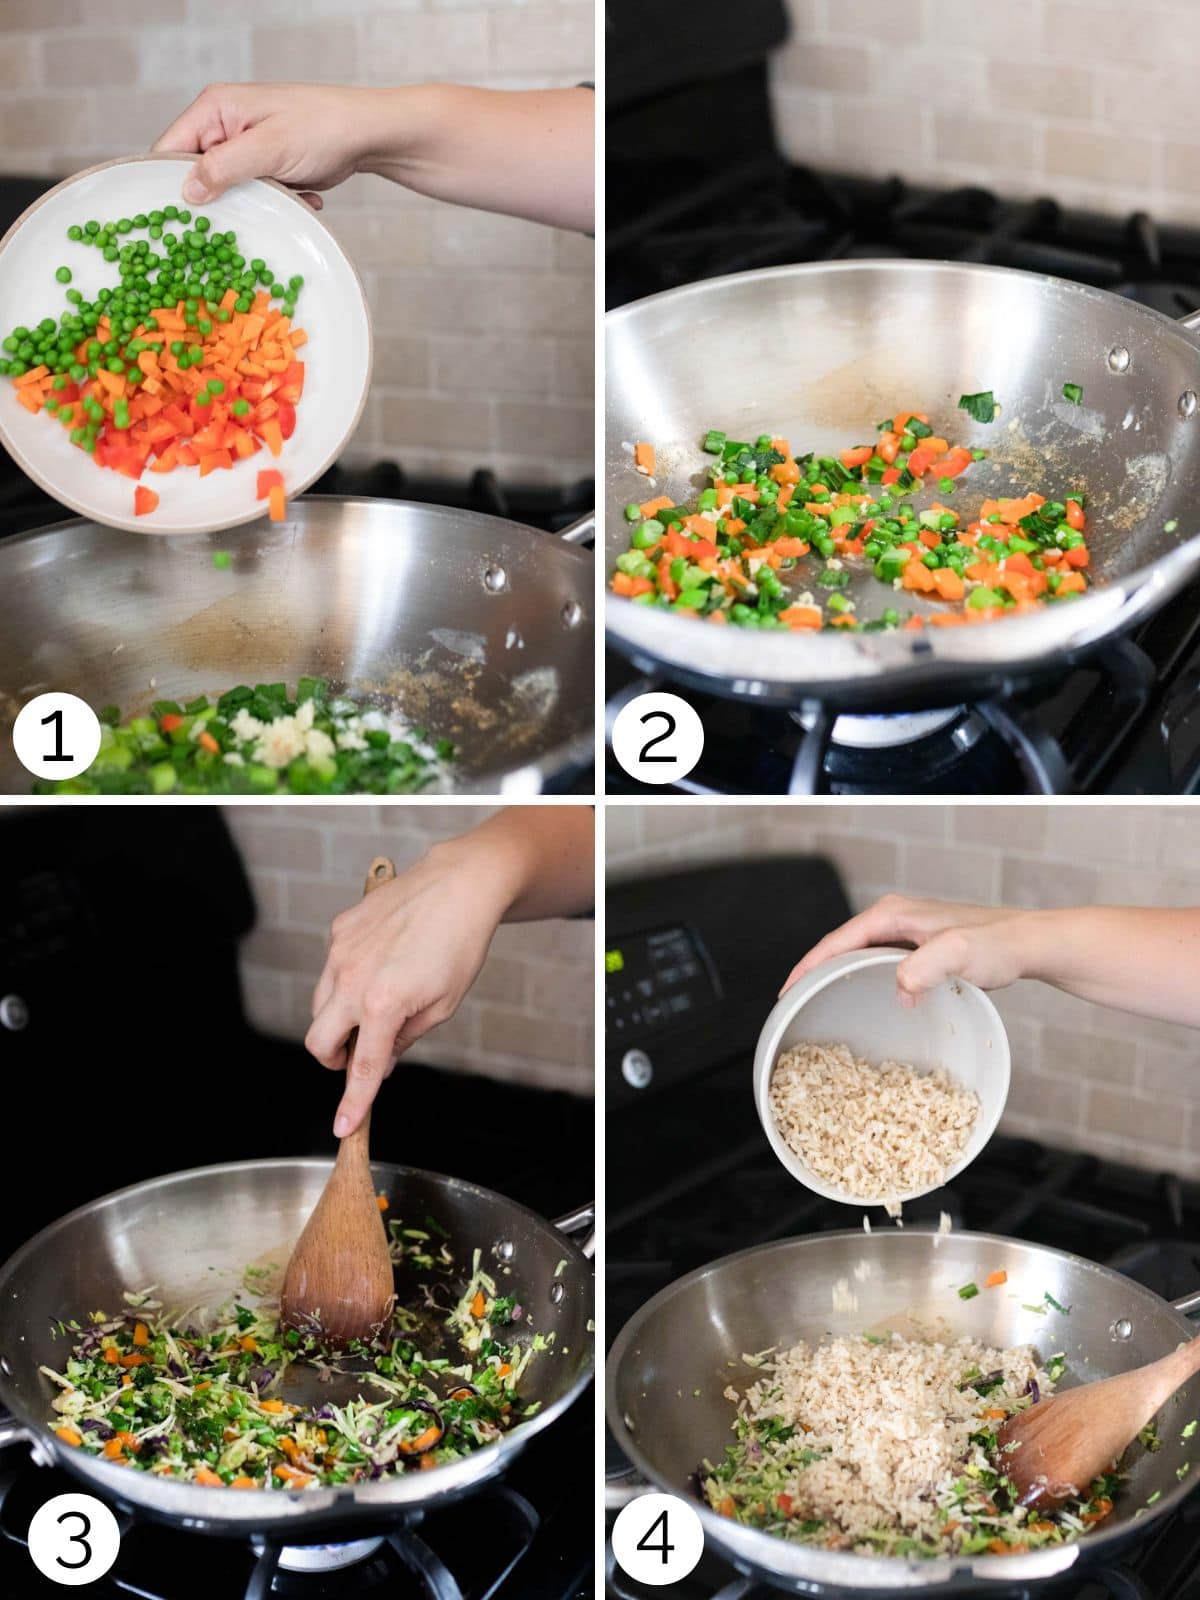 Process photos for cooking vegetables and cold rice.